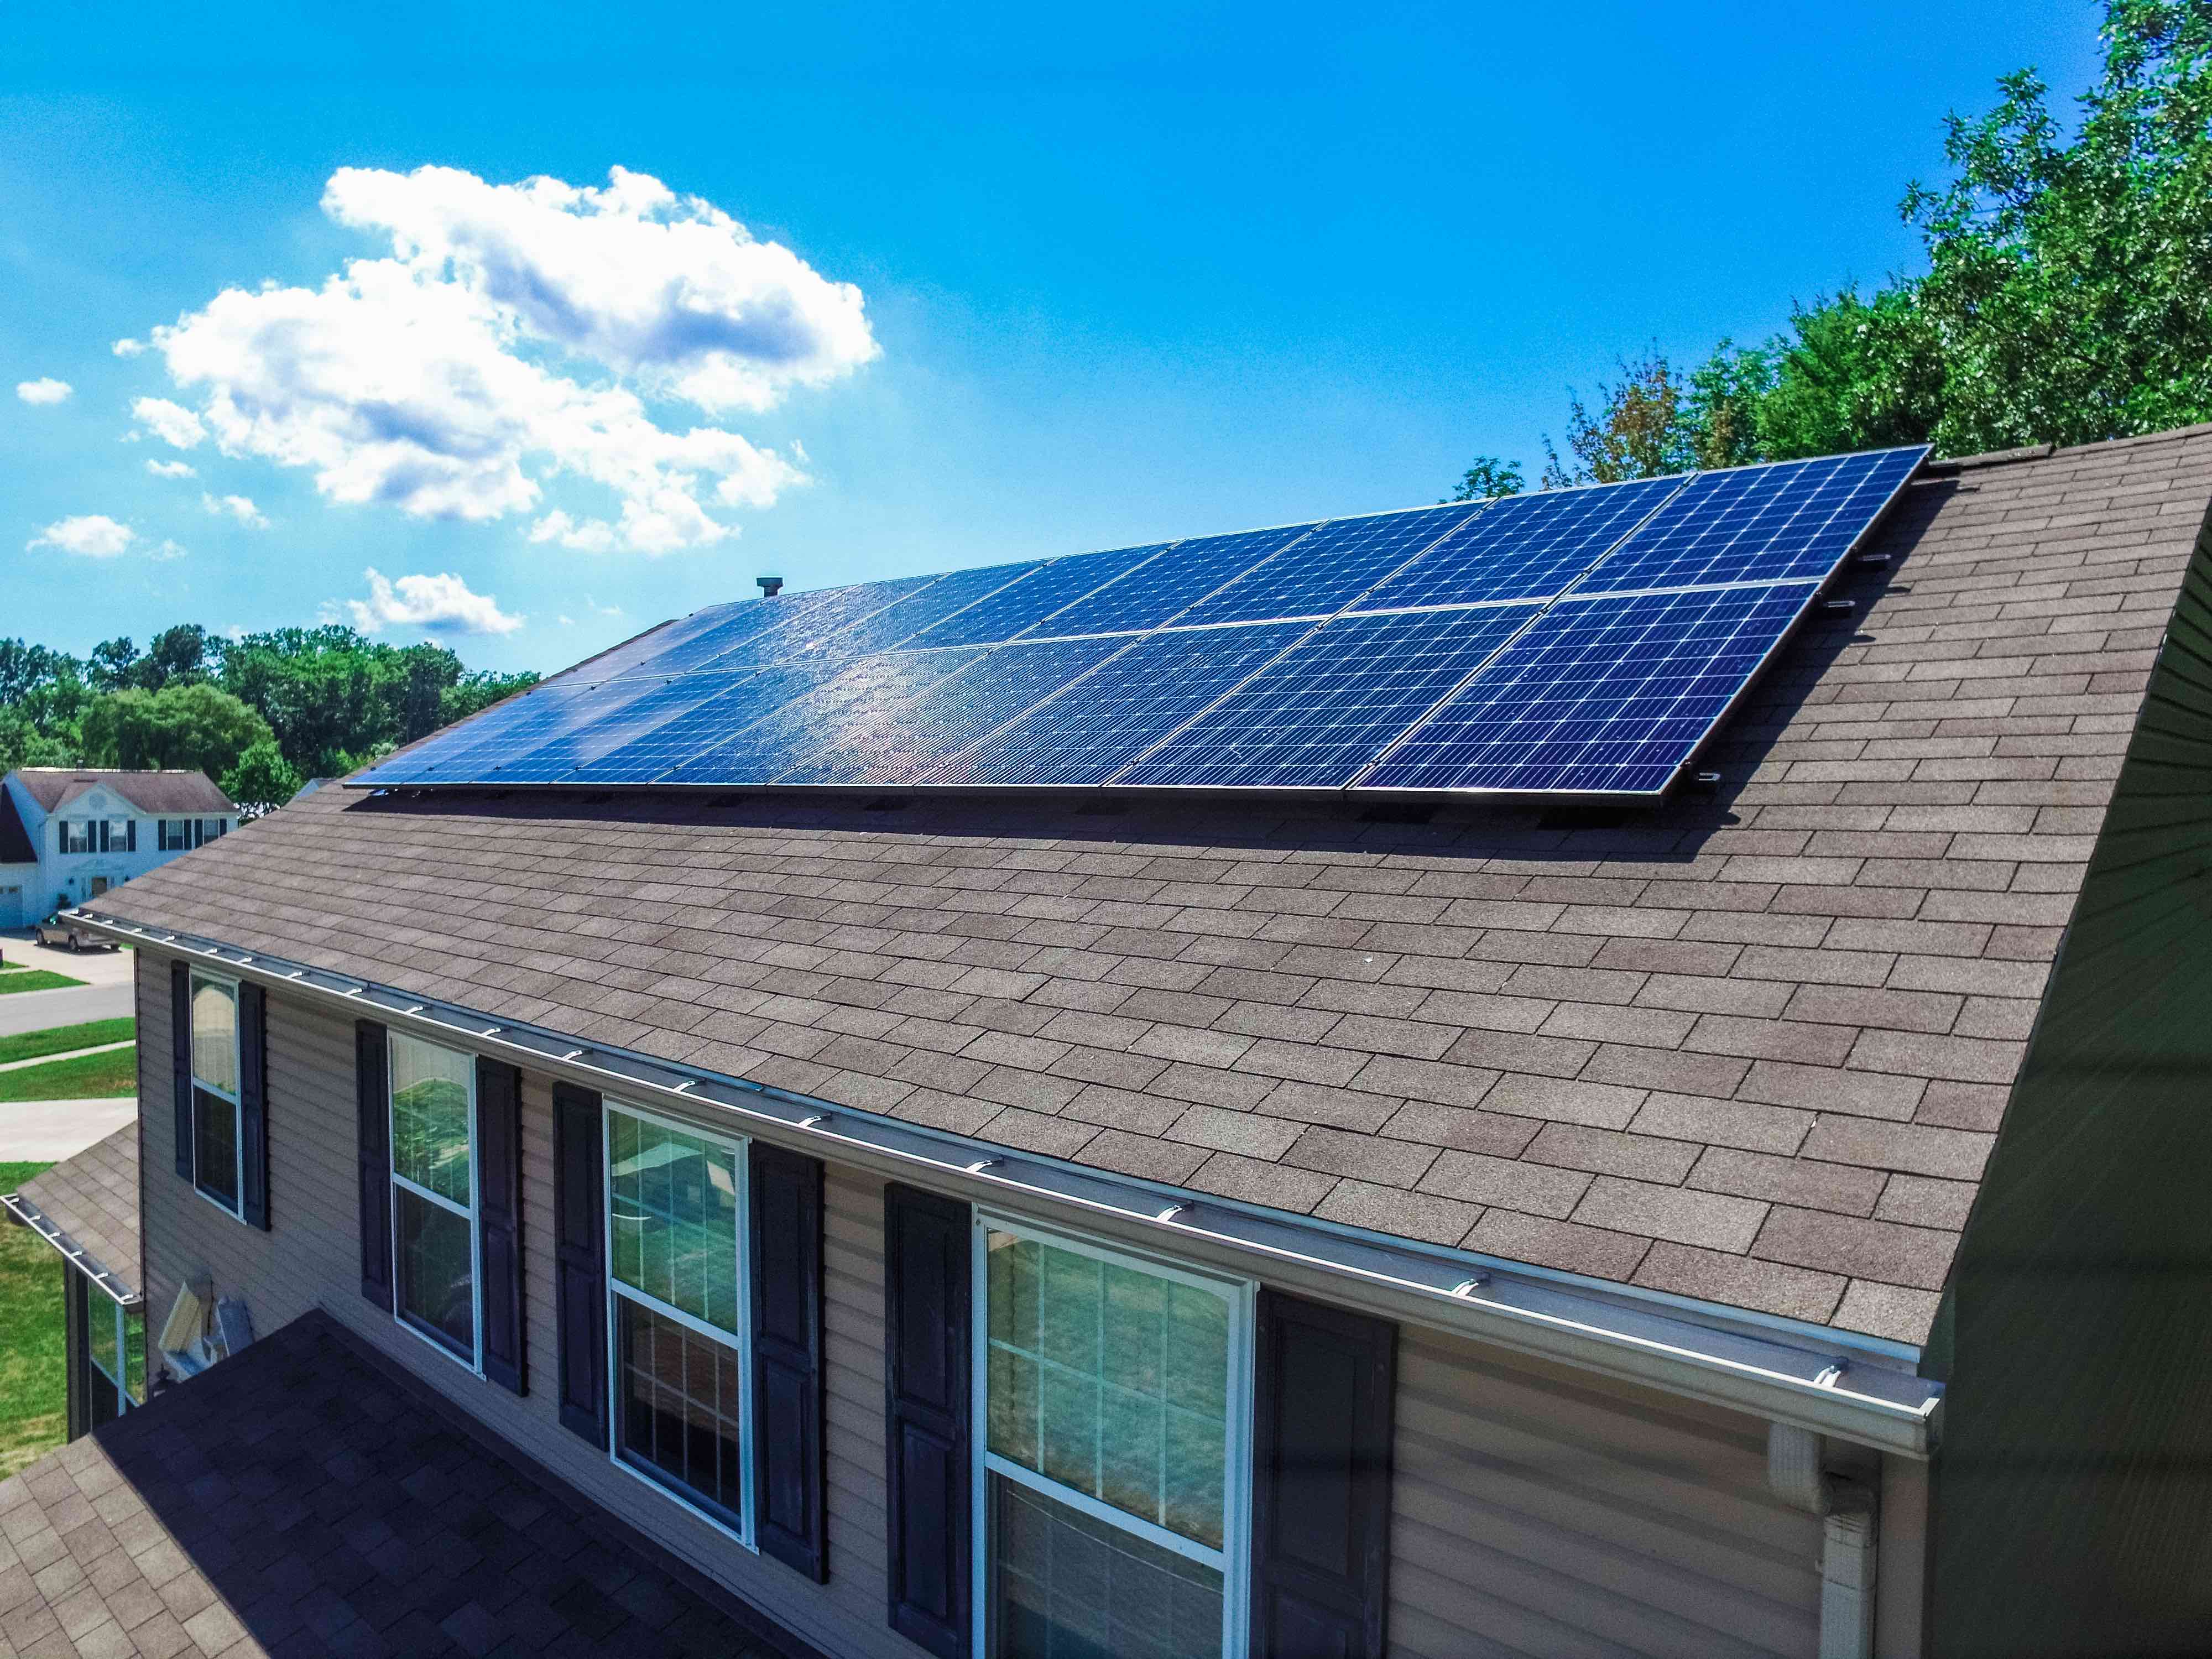 Protect yourself from rising utility rates with solar energy